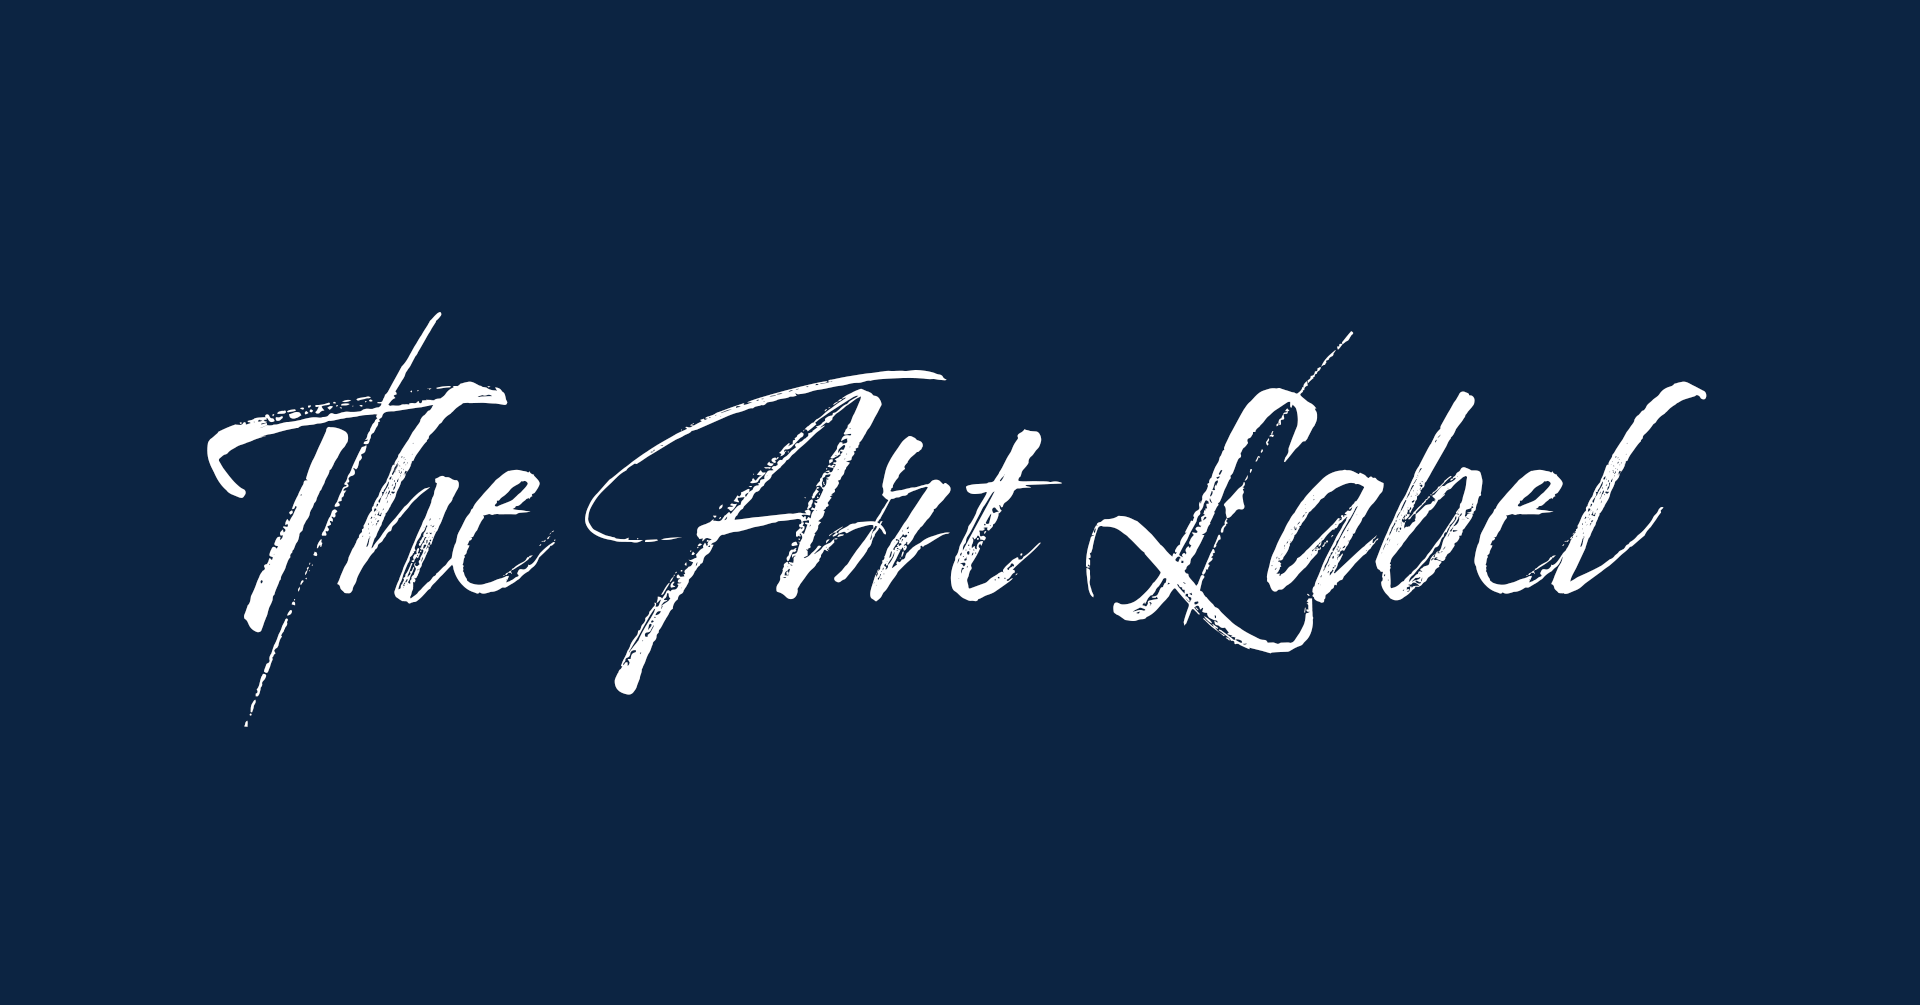 Dark blue background with writing "The Art Label"